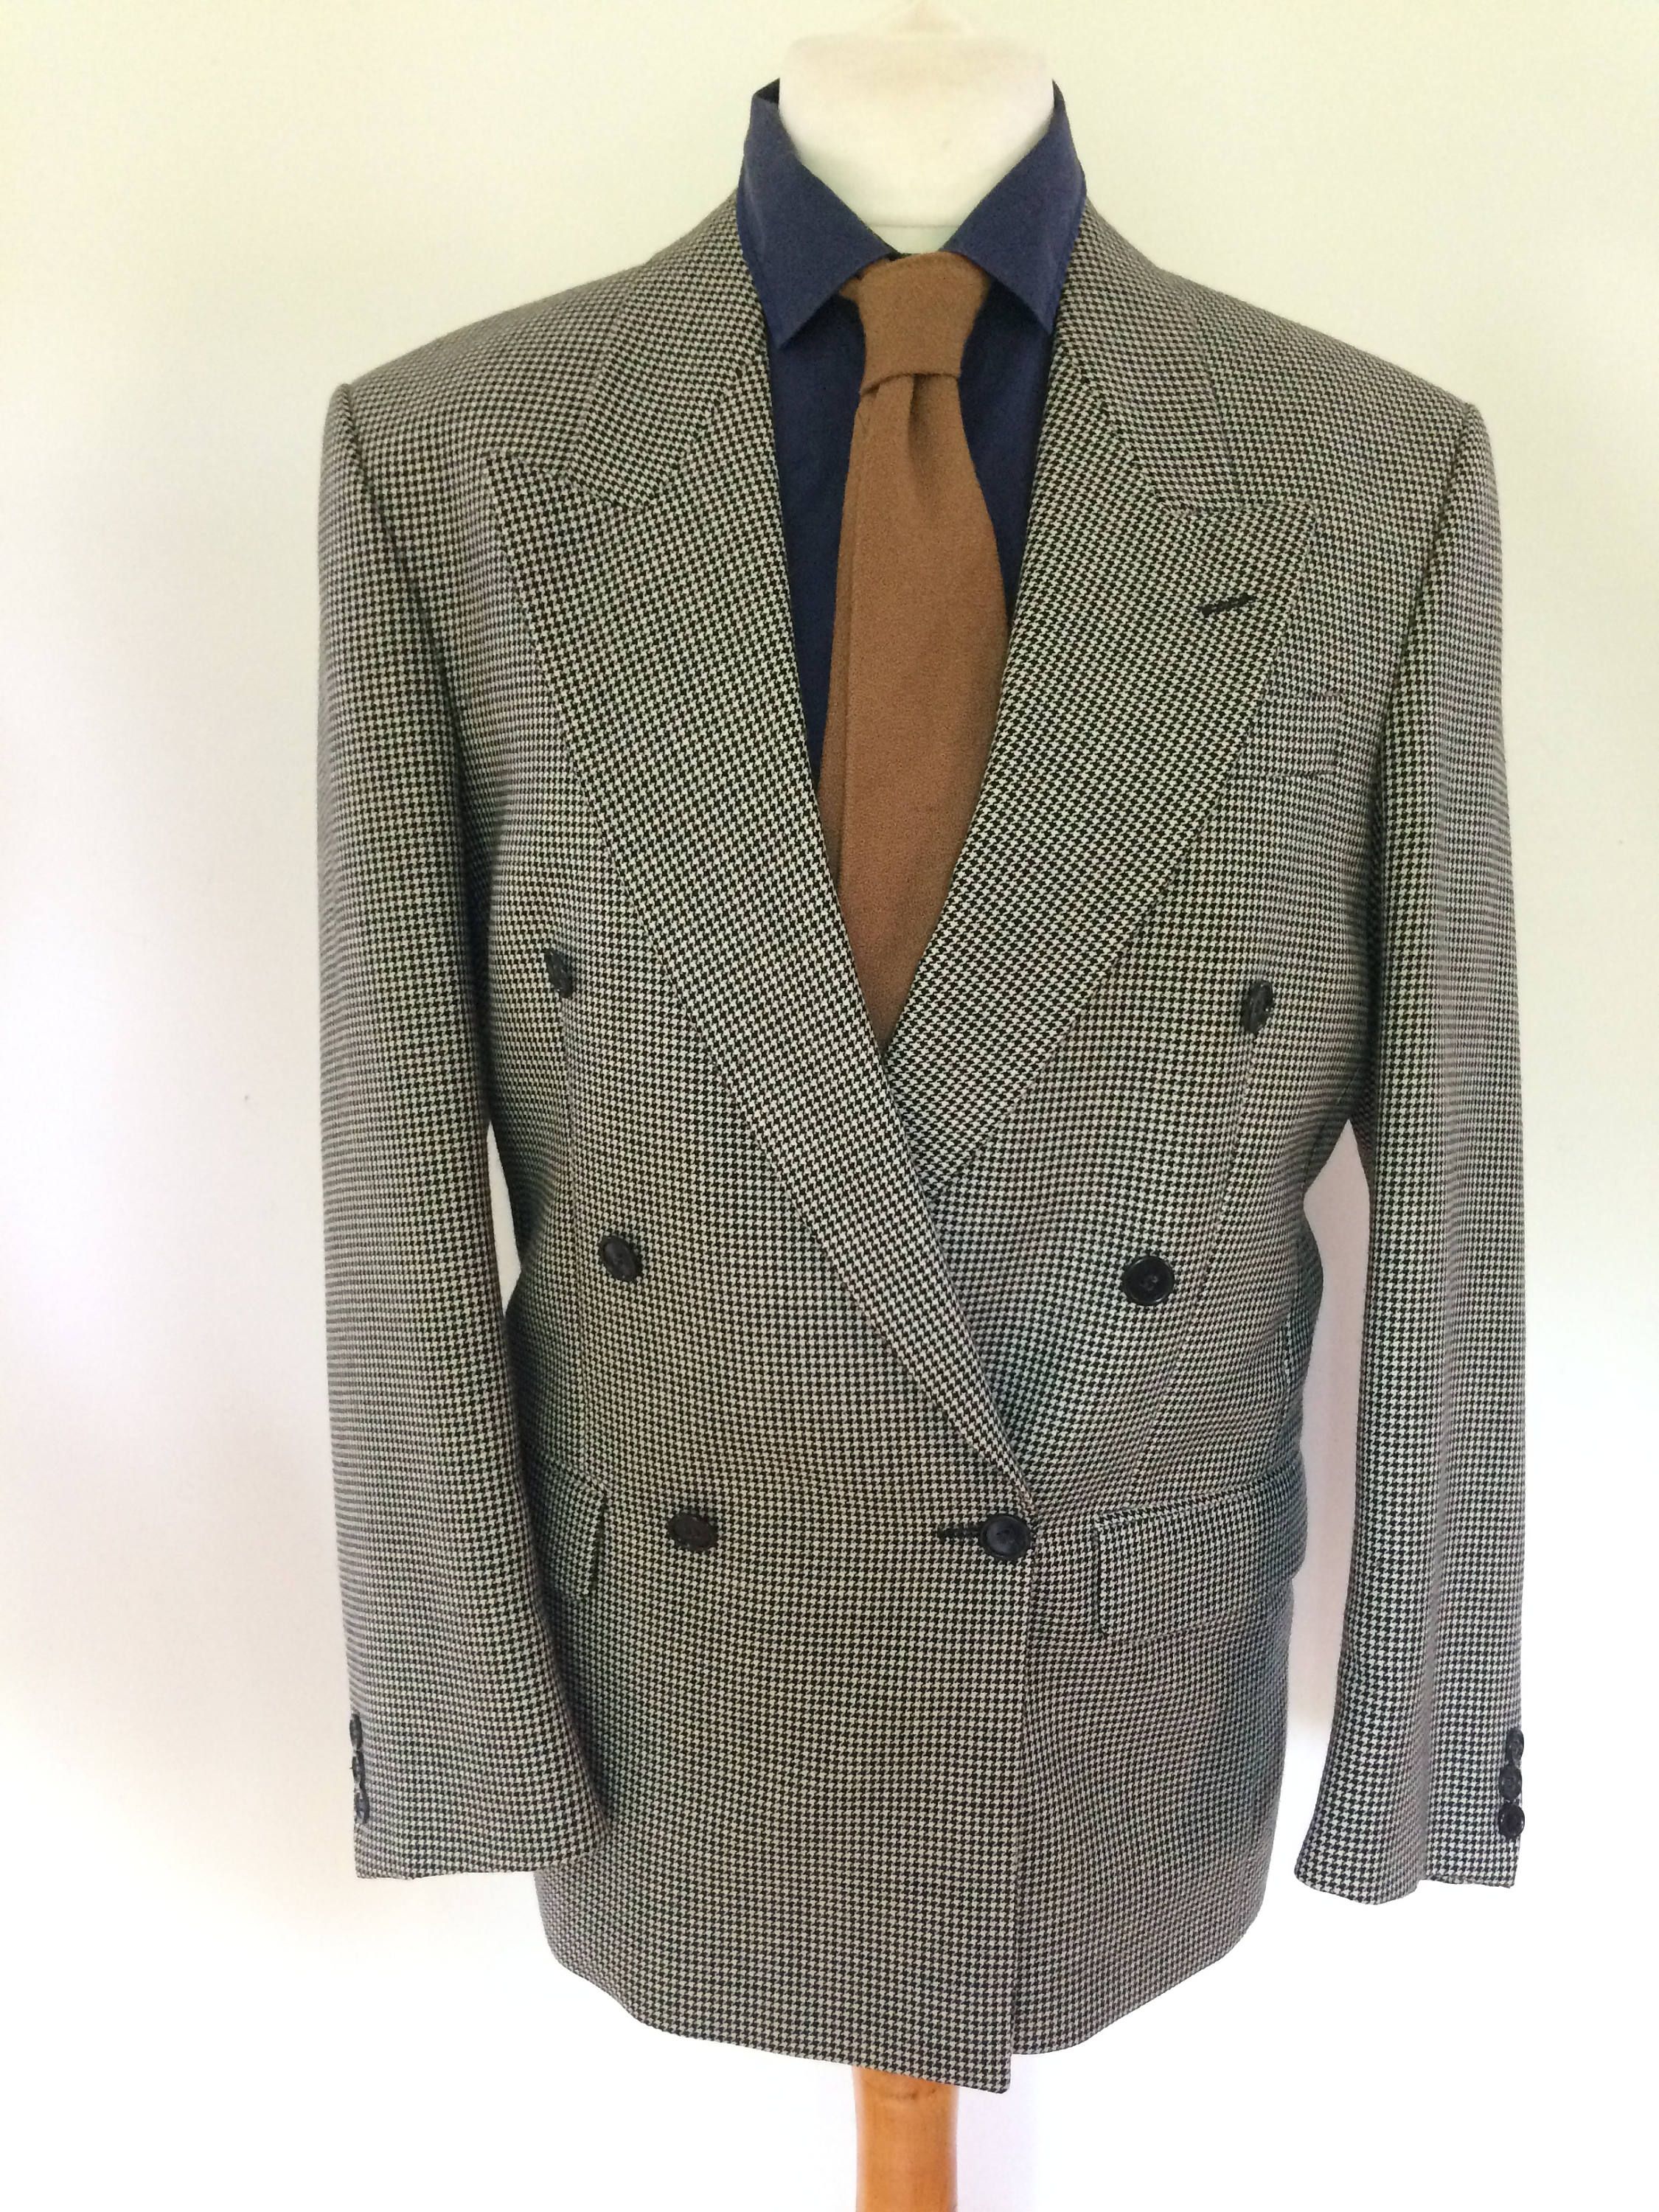 Vintage mens 80s double breasted houndstooth mens jacket by Canda ...